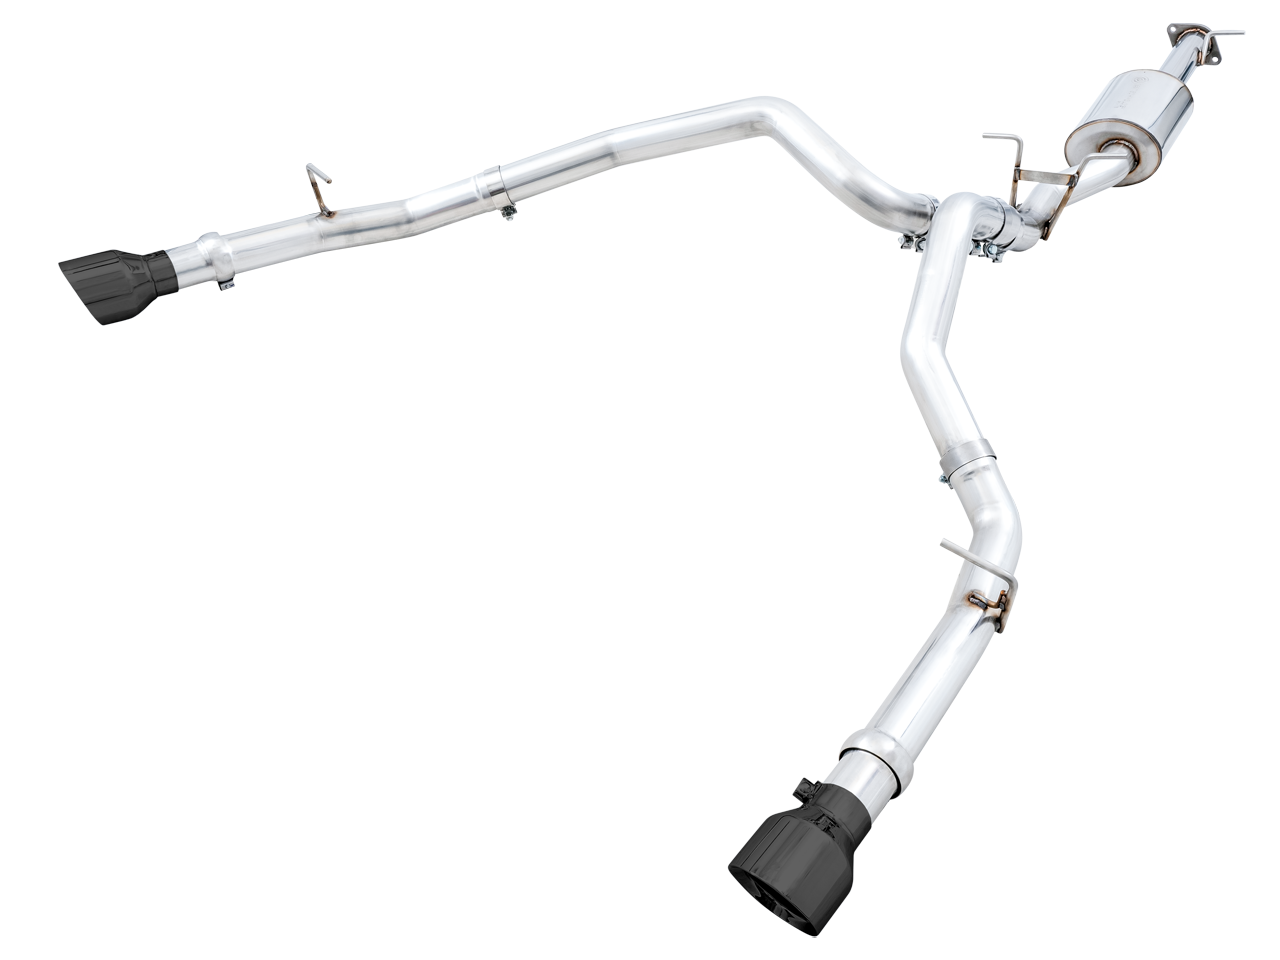 AWE 0FG Exhaust Suite for the 5th Gen RAM 1500 5.7L